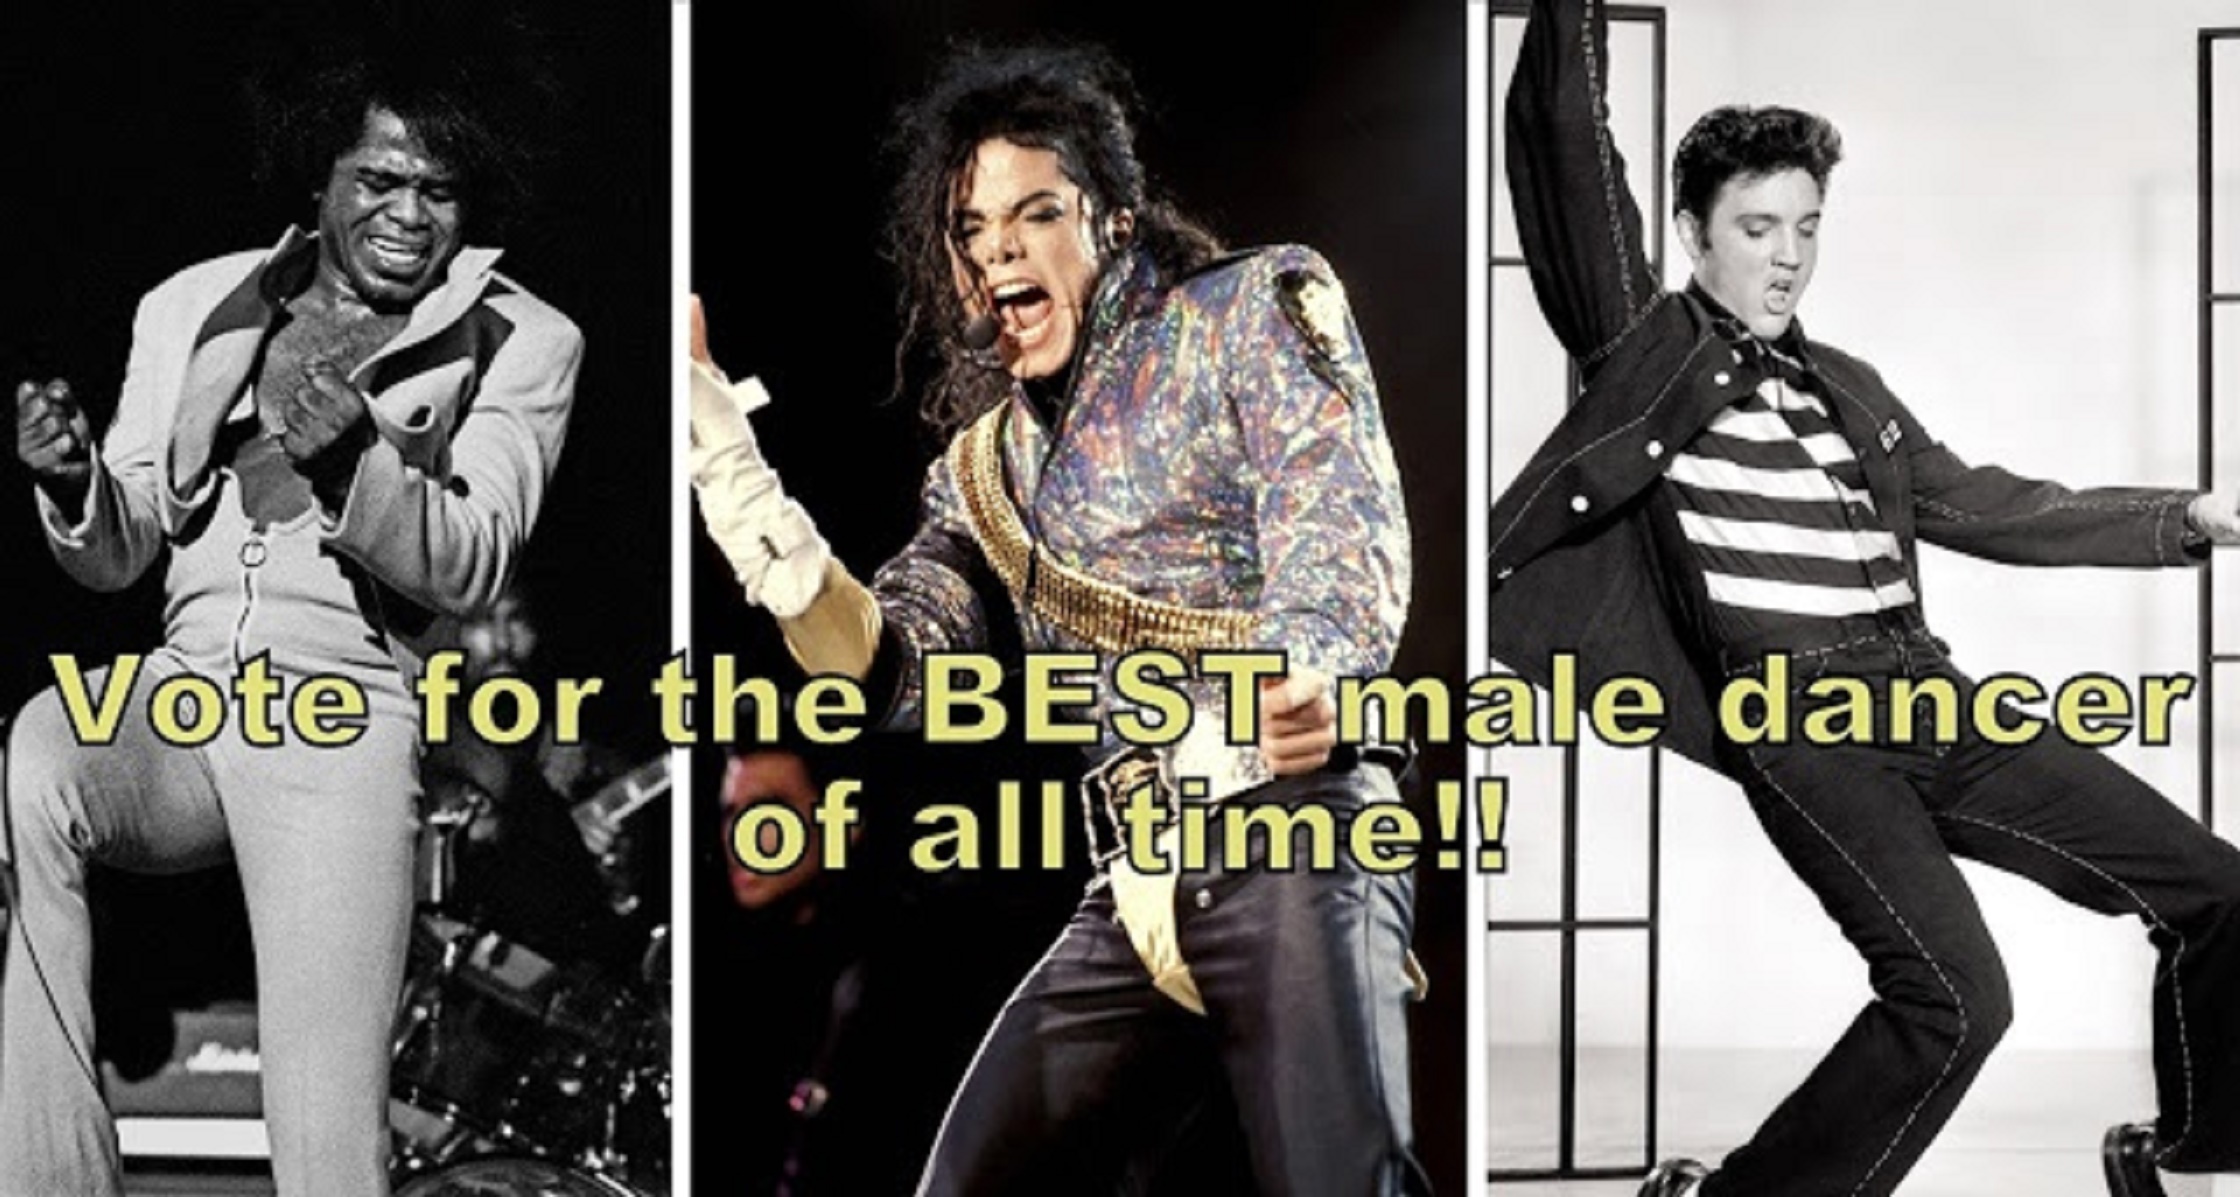 Poll: Michael Jackson, James Brown or Elvis? Who’s the best male-dancer of all time. Vote here.